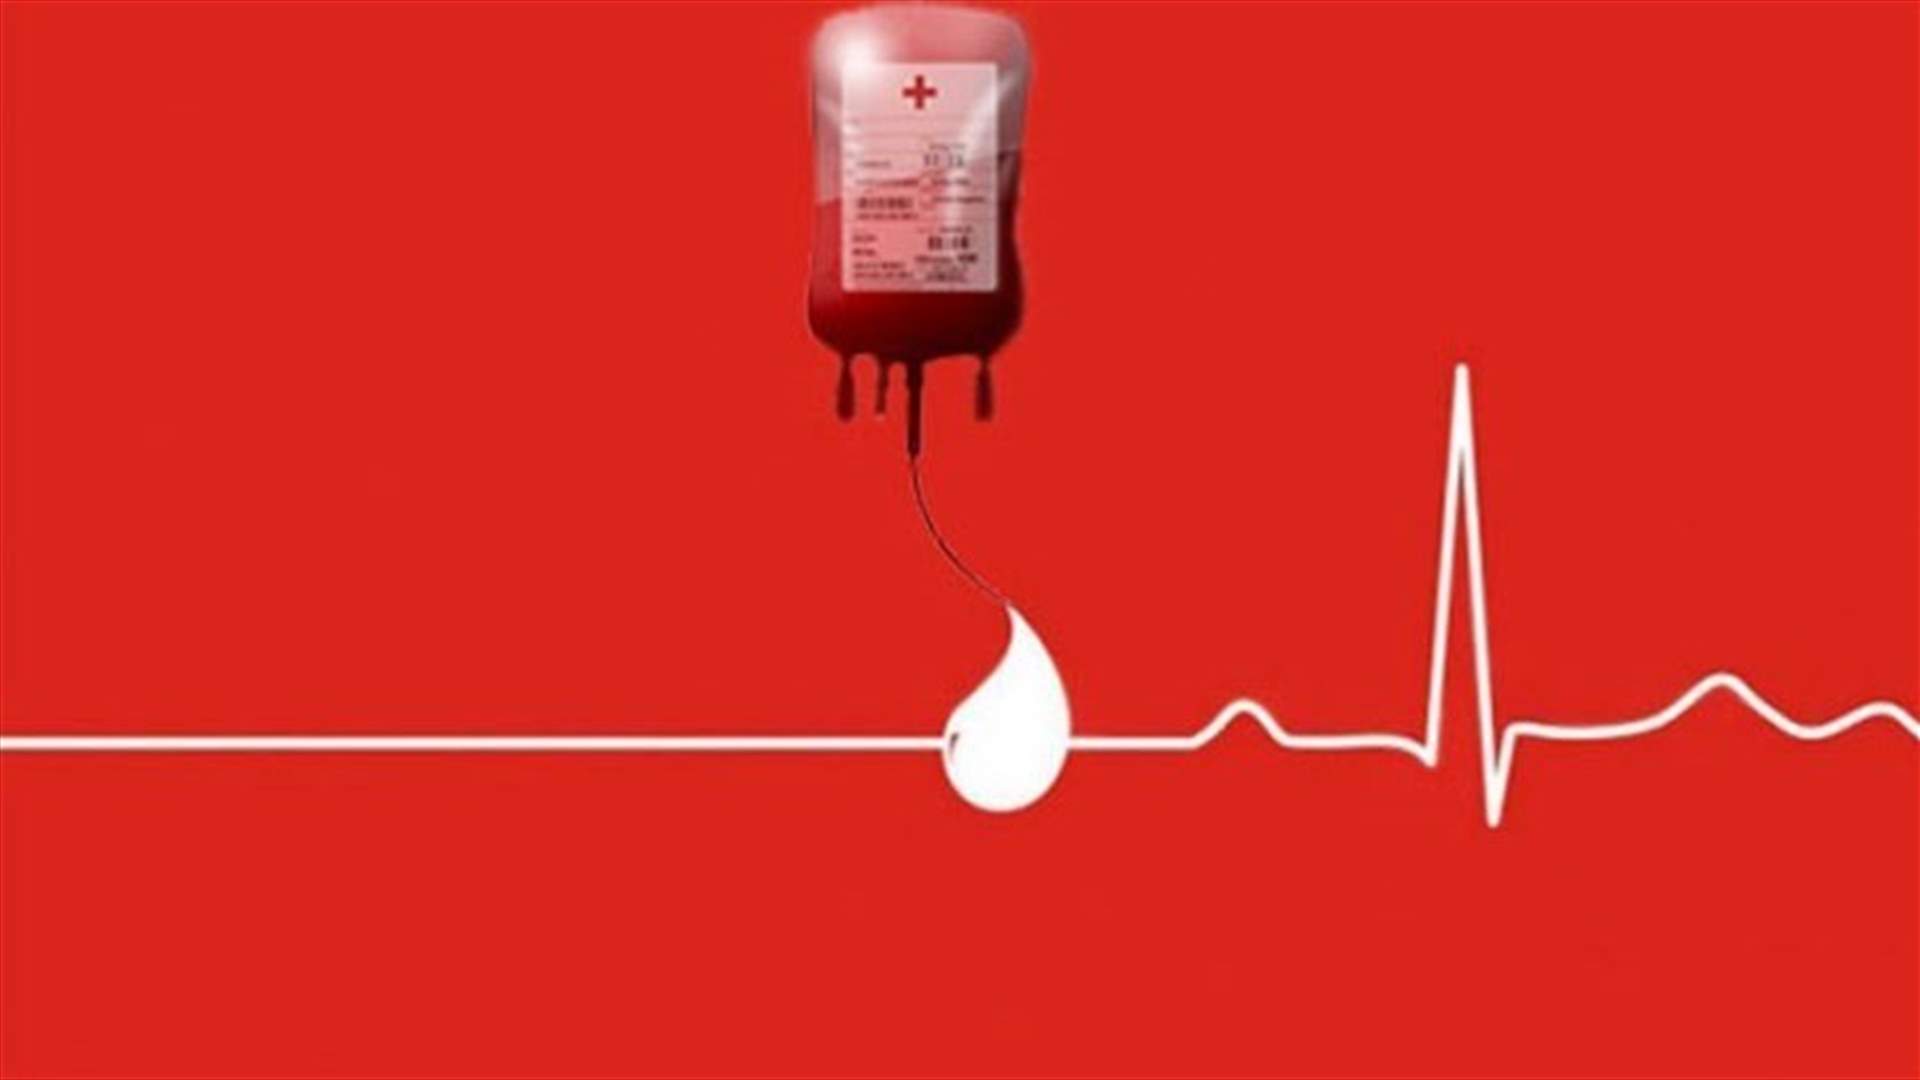 A patient urgently needs 3 units of A+ blood type. To donate at the Red Cross - Spears, please call: 03/080905